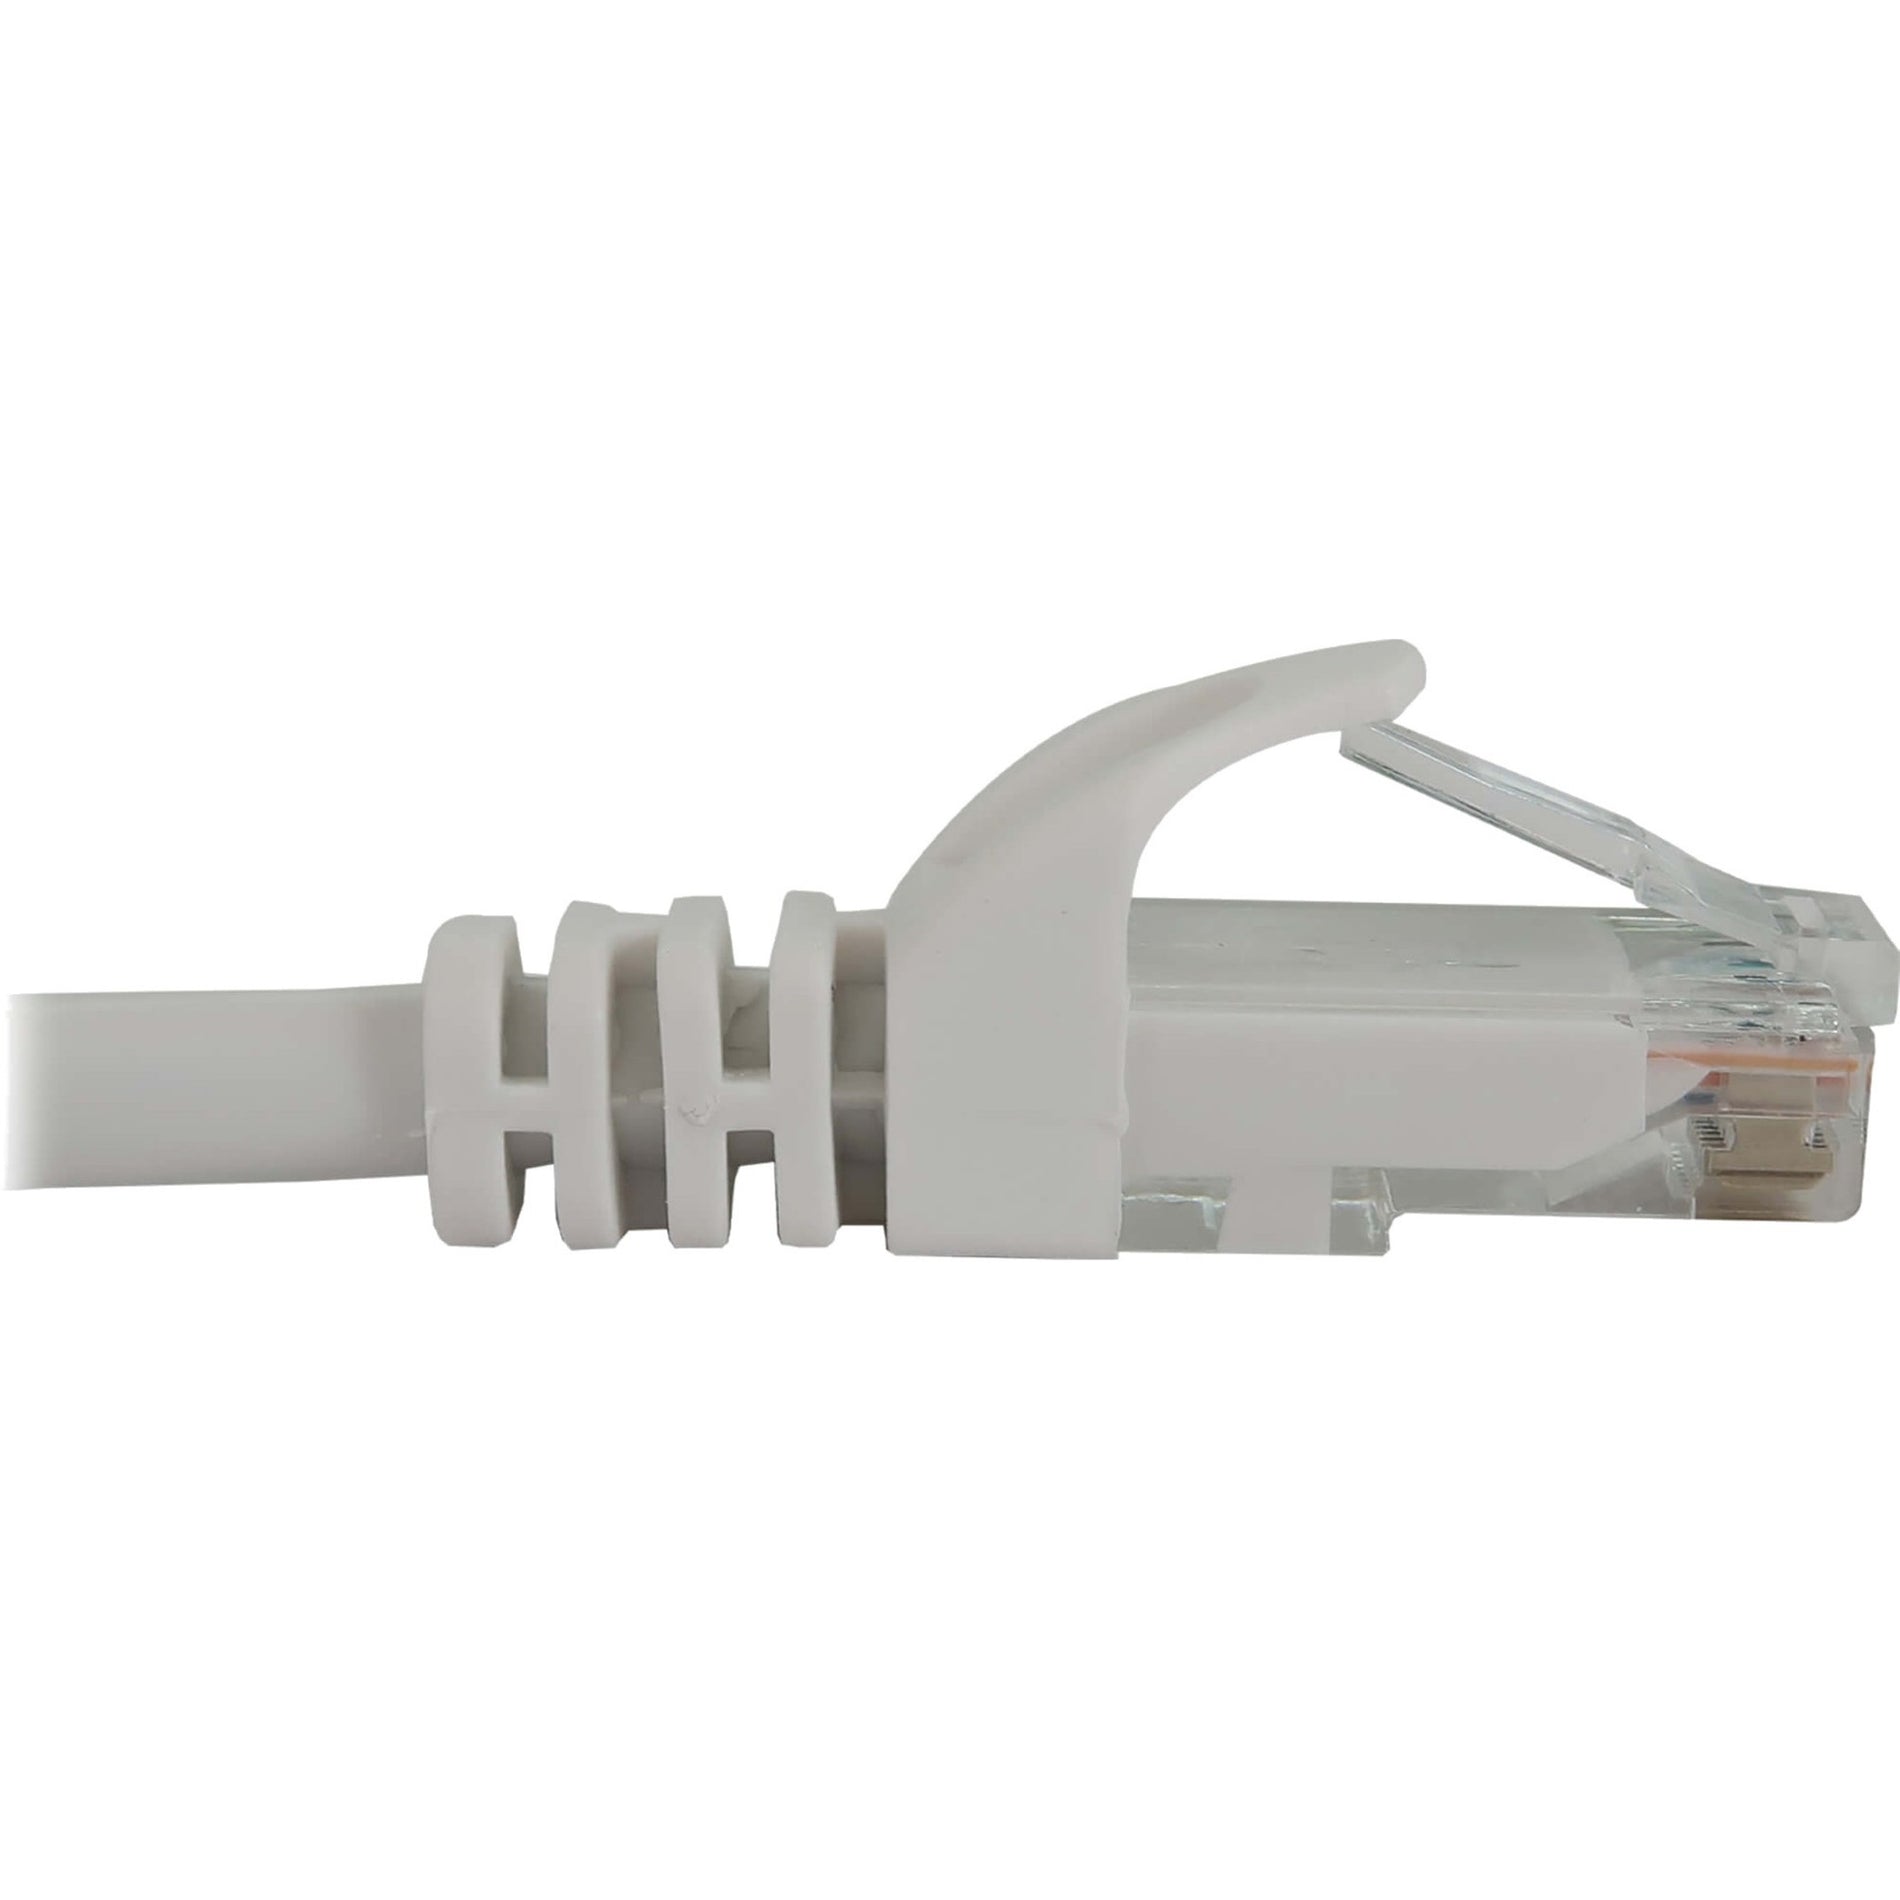 Tripp Lite N261-050-WH Cat.6a UTP Network Cable, 10G PoE, White 50ft